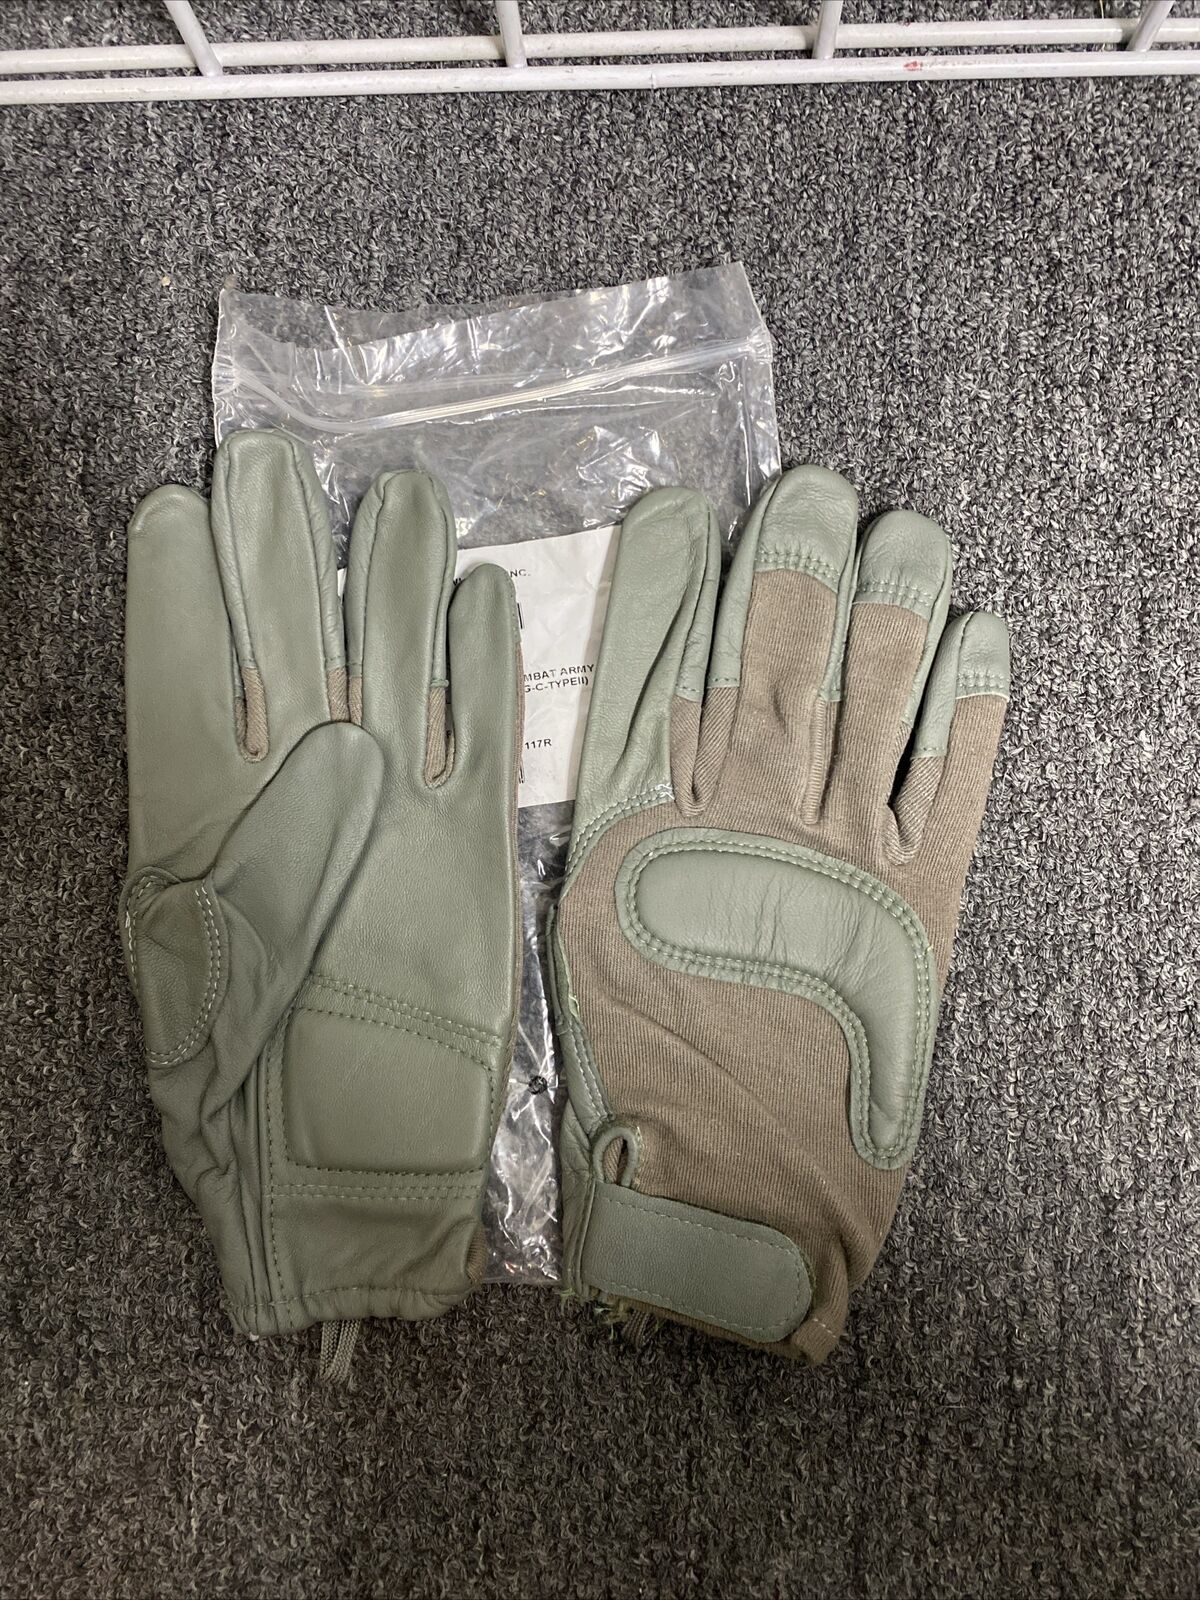 US Army Combat Gloves Foliage Green Size X-LARGE New In Package